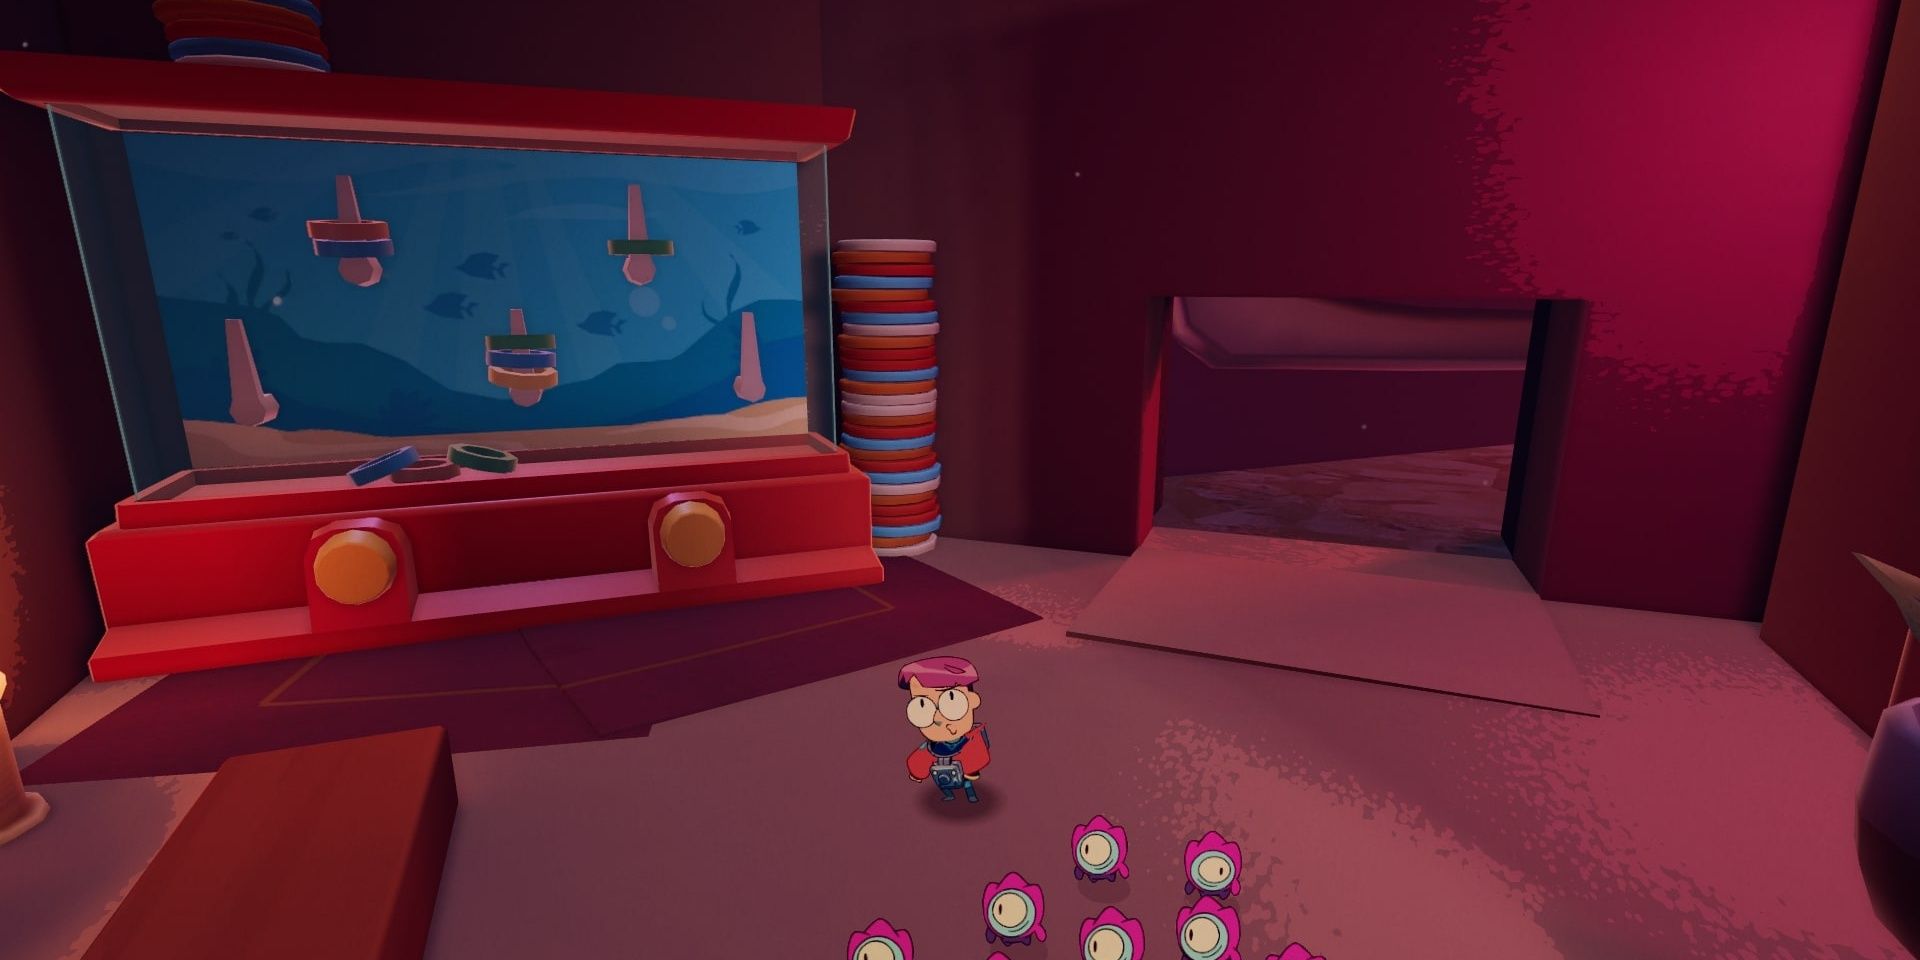 A screenshot of Tinykin standing in front of a hole in wall in the arcade